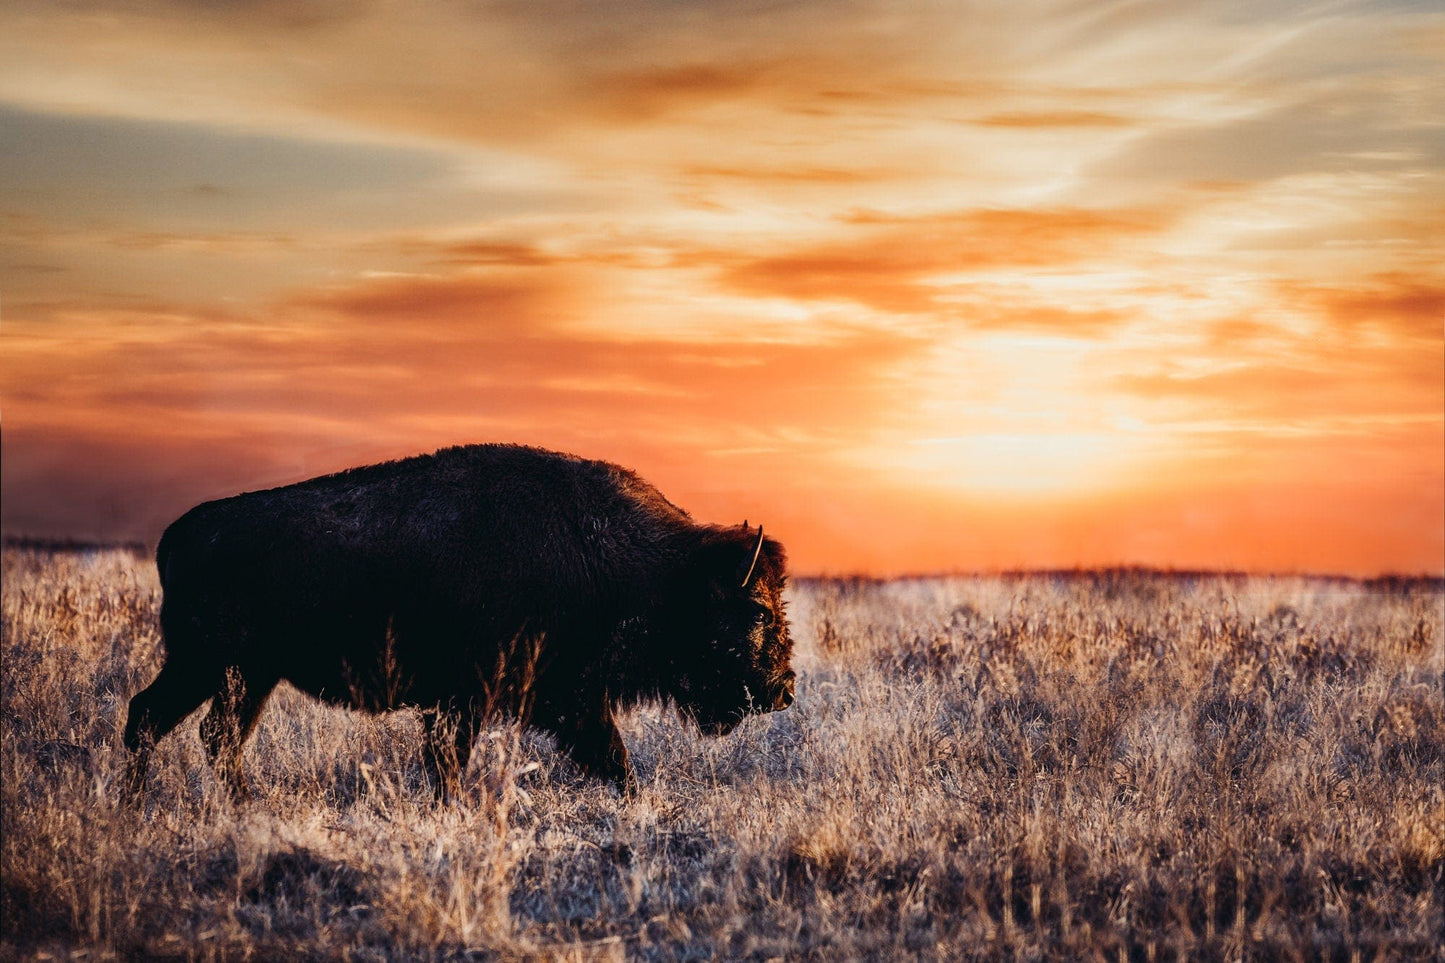 Bison Wall Art Canvas - Colorful Orange Sunset Paper Photo Print / 12 x 18 Inches Wall Art Teri James Photography